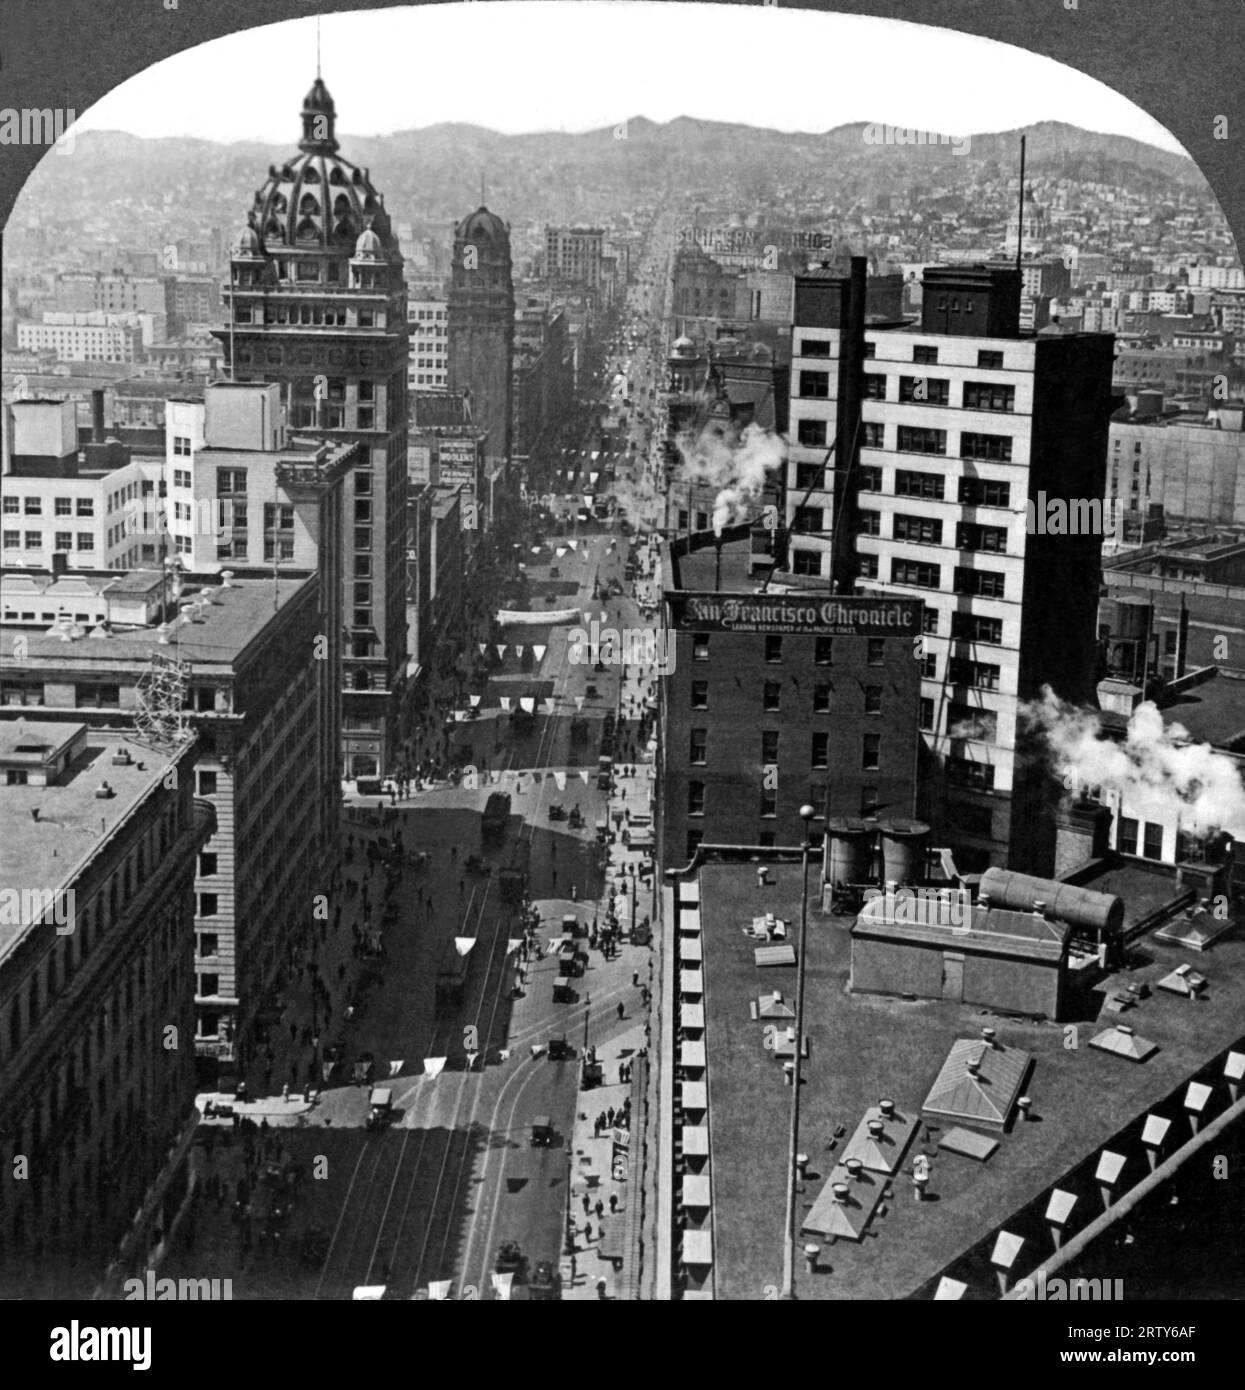 San Francisco, California   c. 1910.  Market Street in San Francisco, with the Call Building at left. Designed by noted local architects James and Merritt Reid along with bridge engineer Charles Strobe, the structure survived the 1906 earthquake. Eighteen stories tall, it was San Francisco's first sksyscraper and the tallest building west of Chicago. Stock Photo